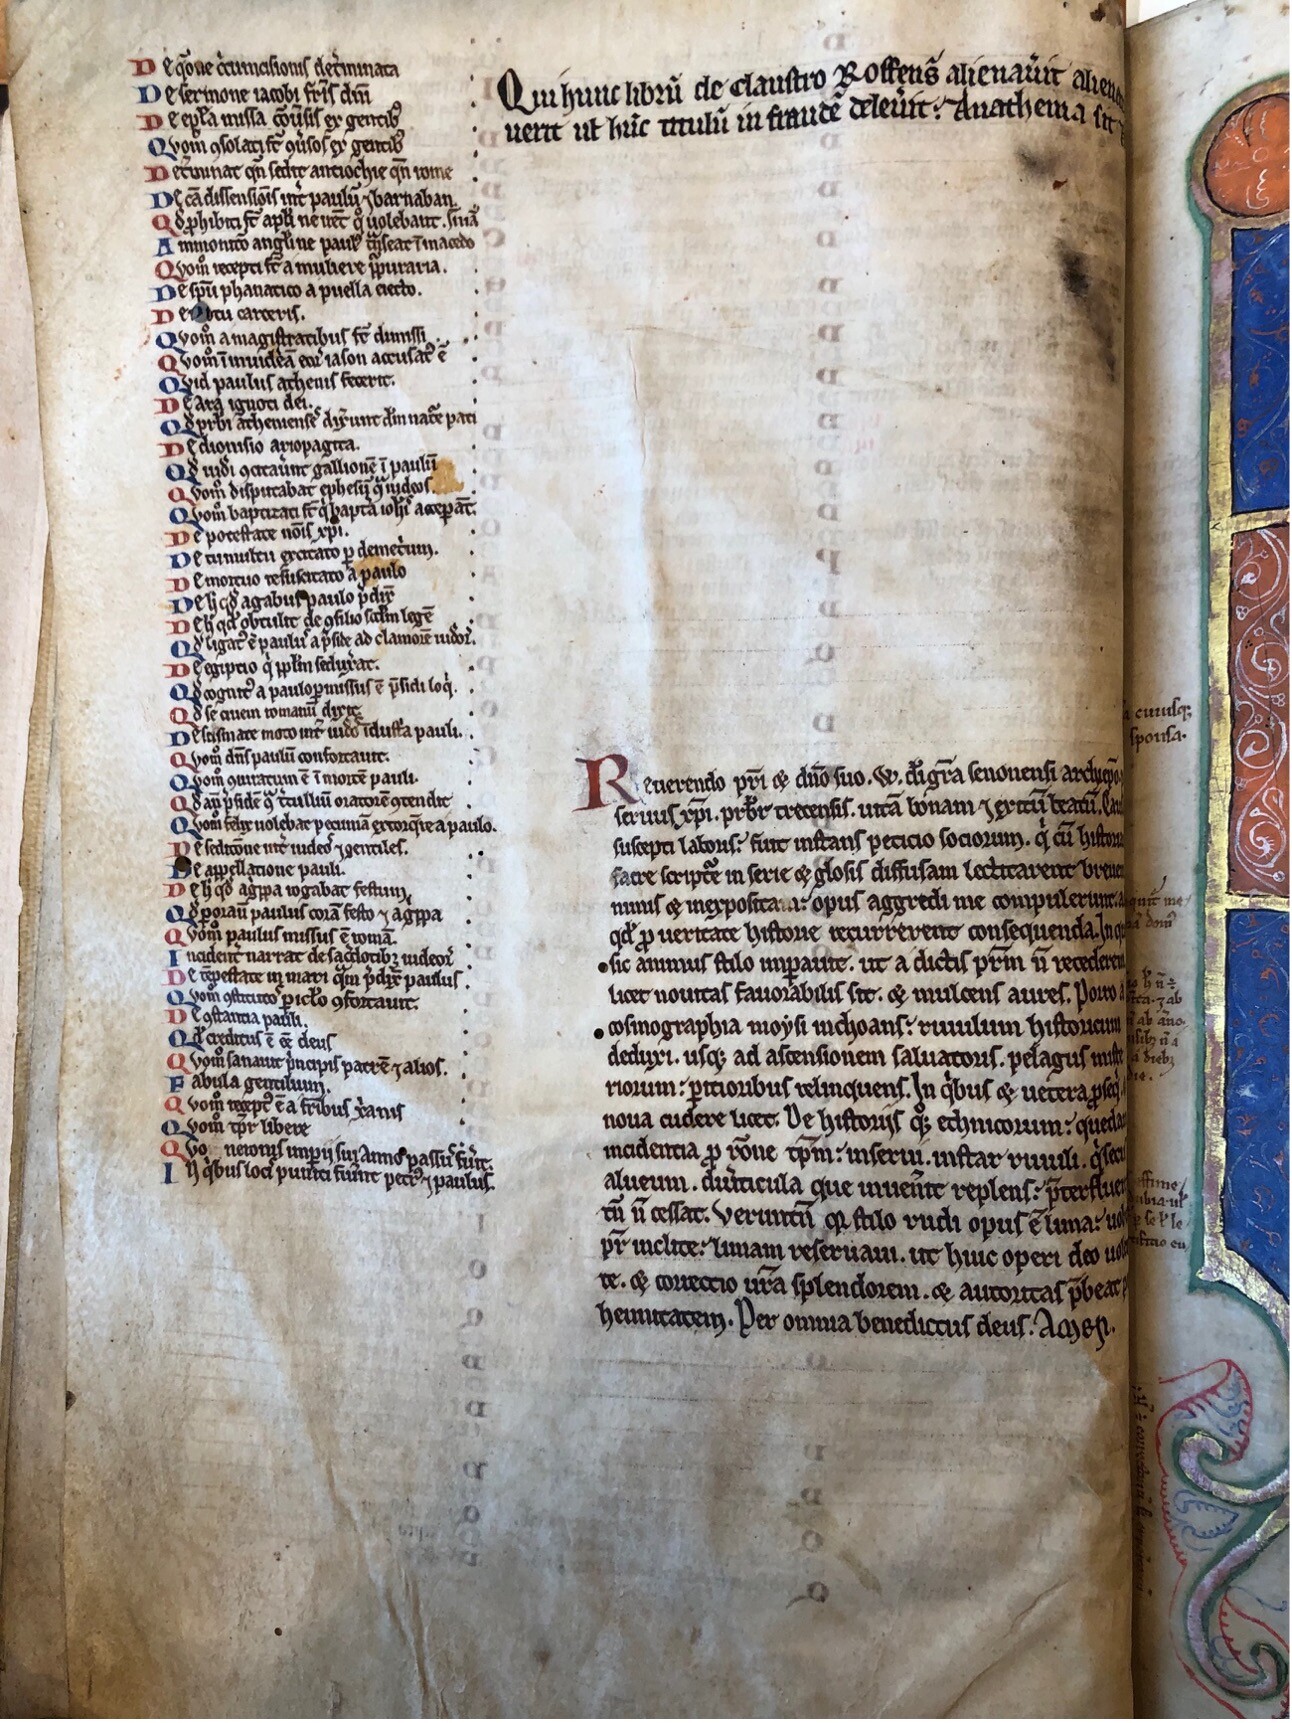 A page of a medieval manuscript featuring text in black with red and blue initials.